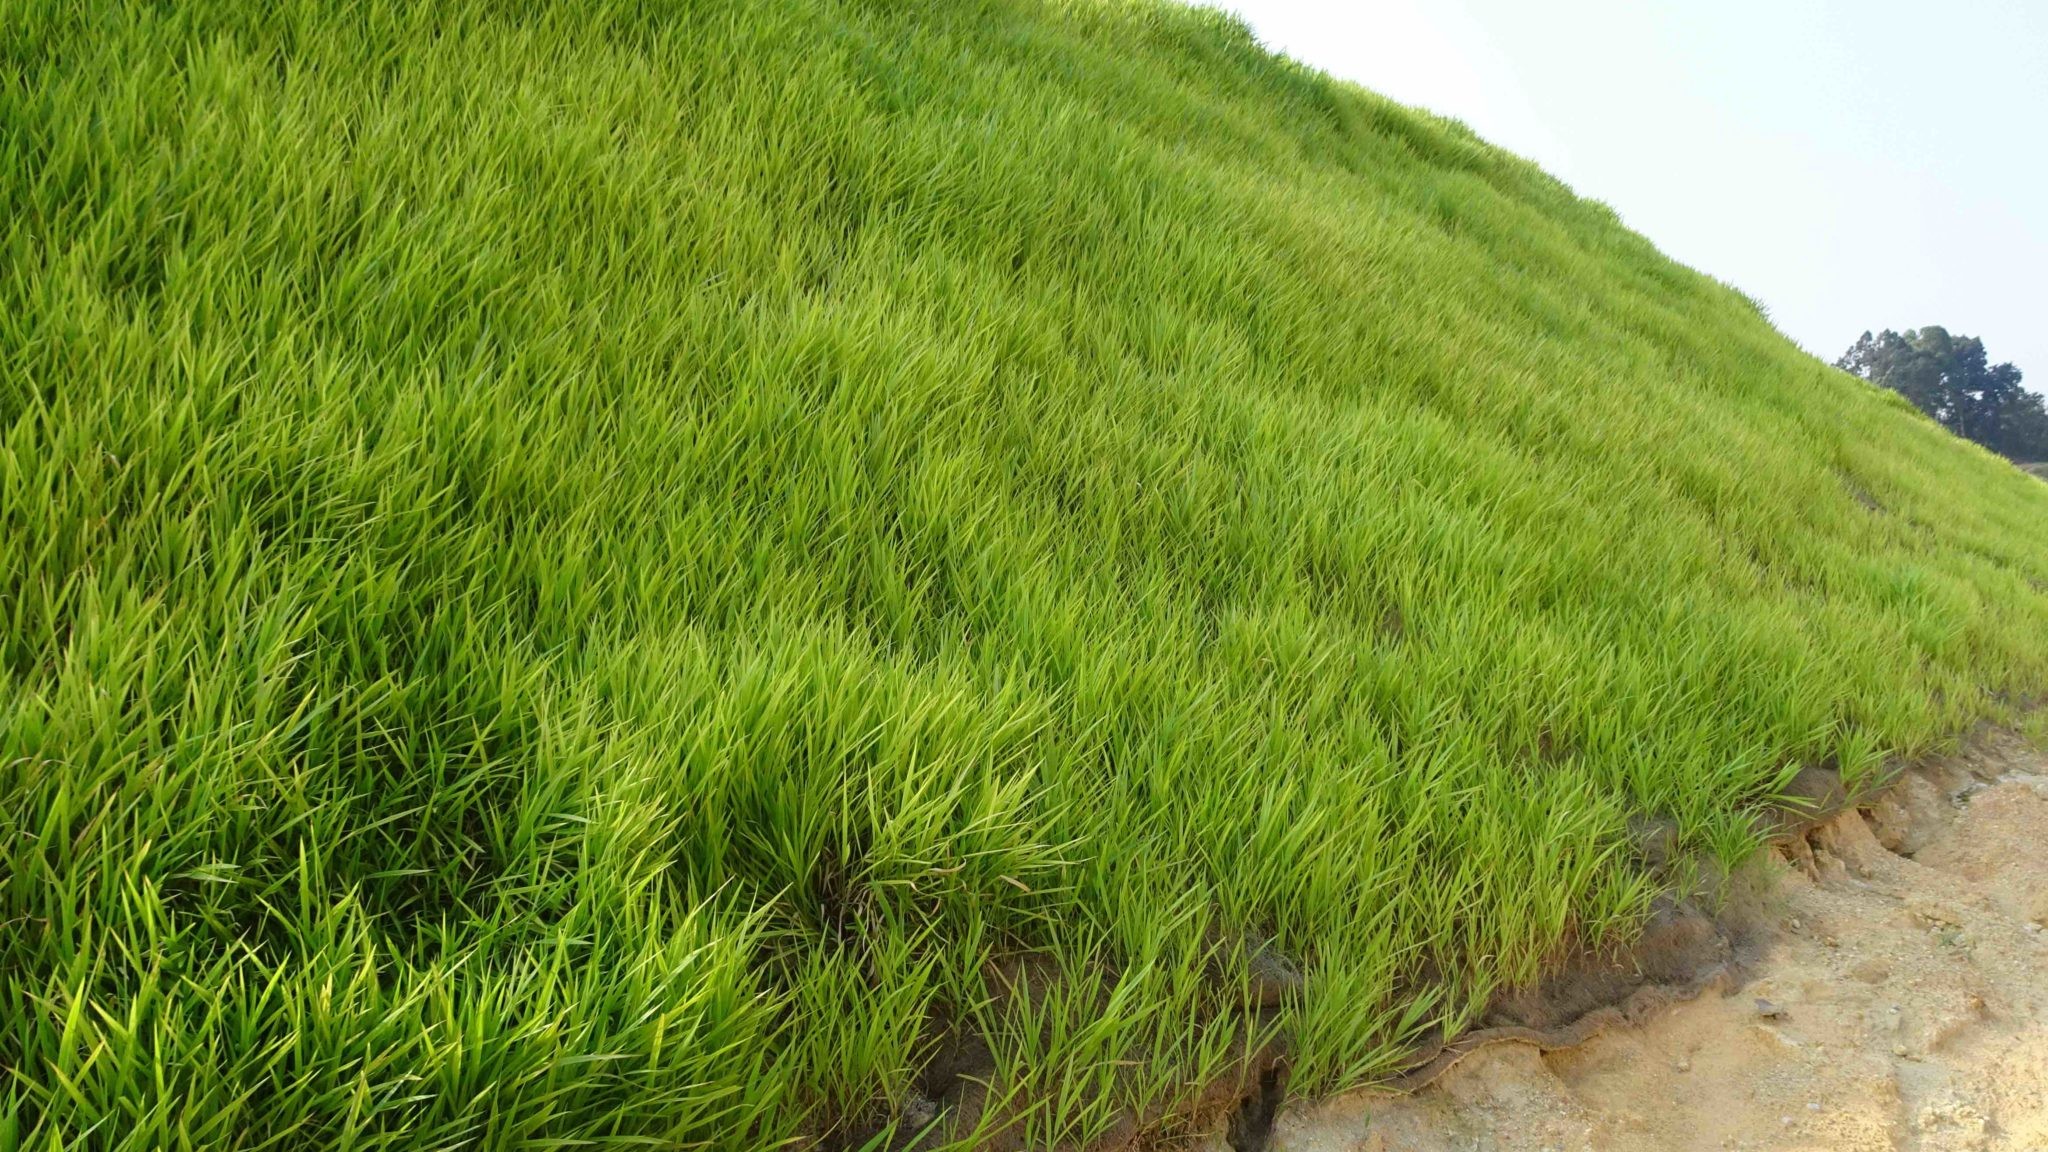 global-road-technology-erosion-control-engineering-grasses